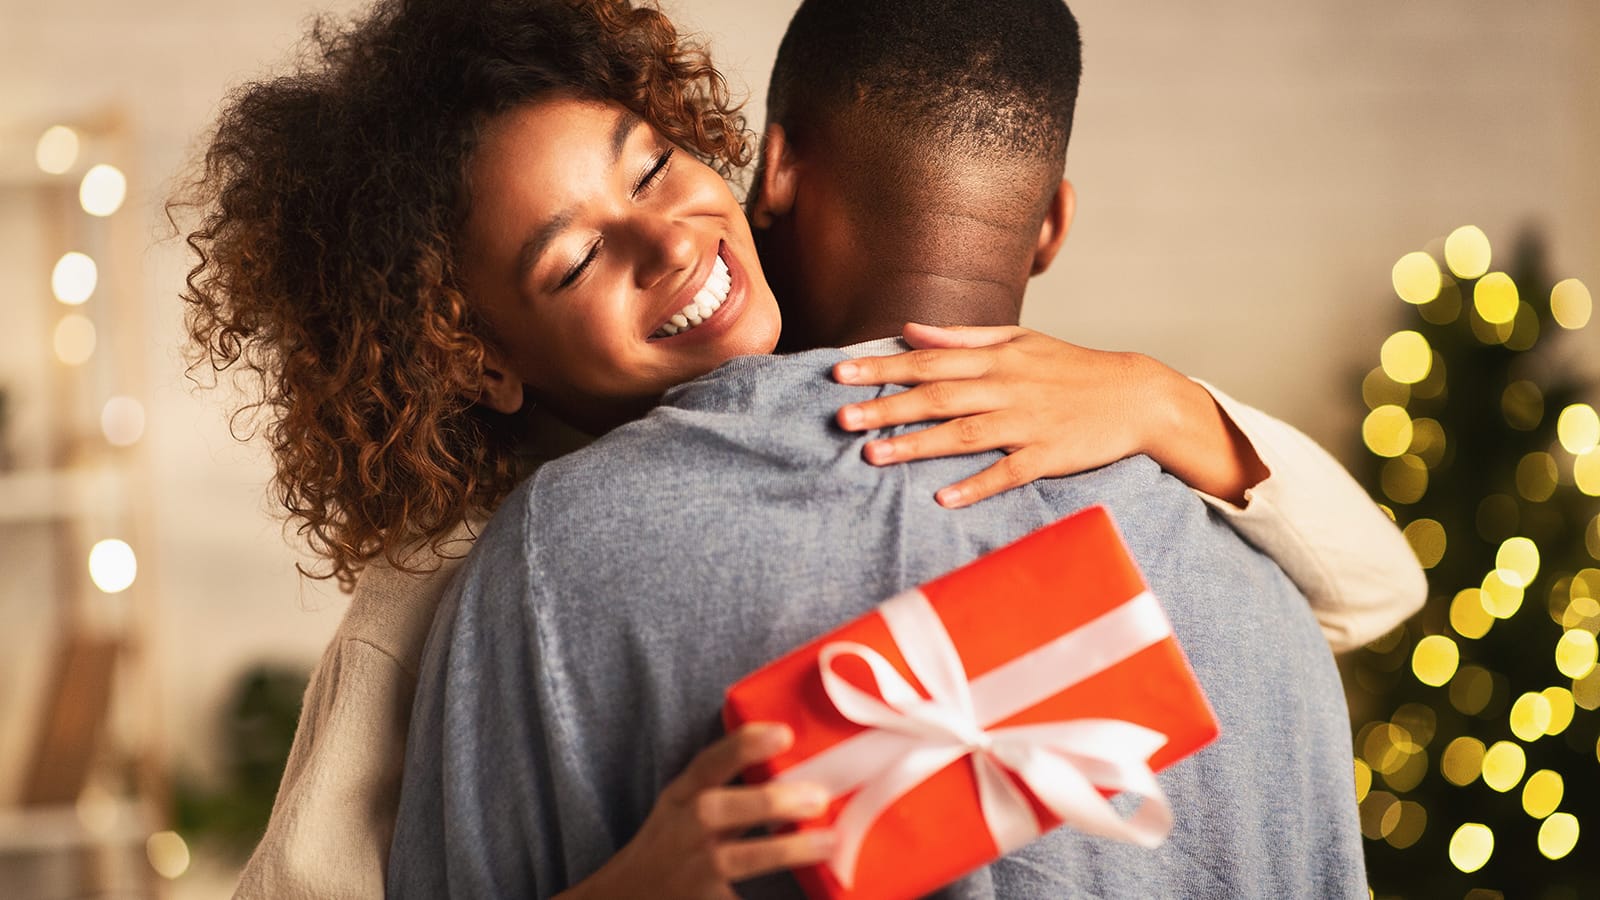 Woman hugging man after gift